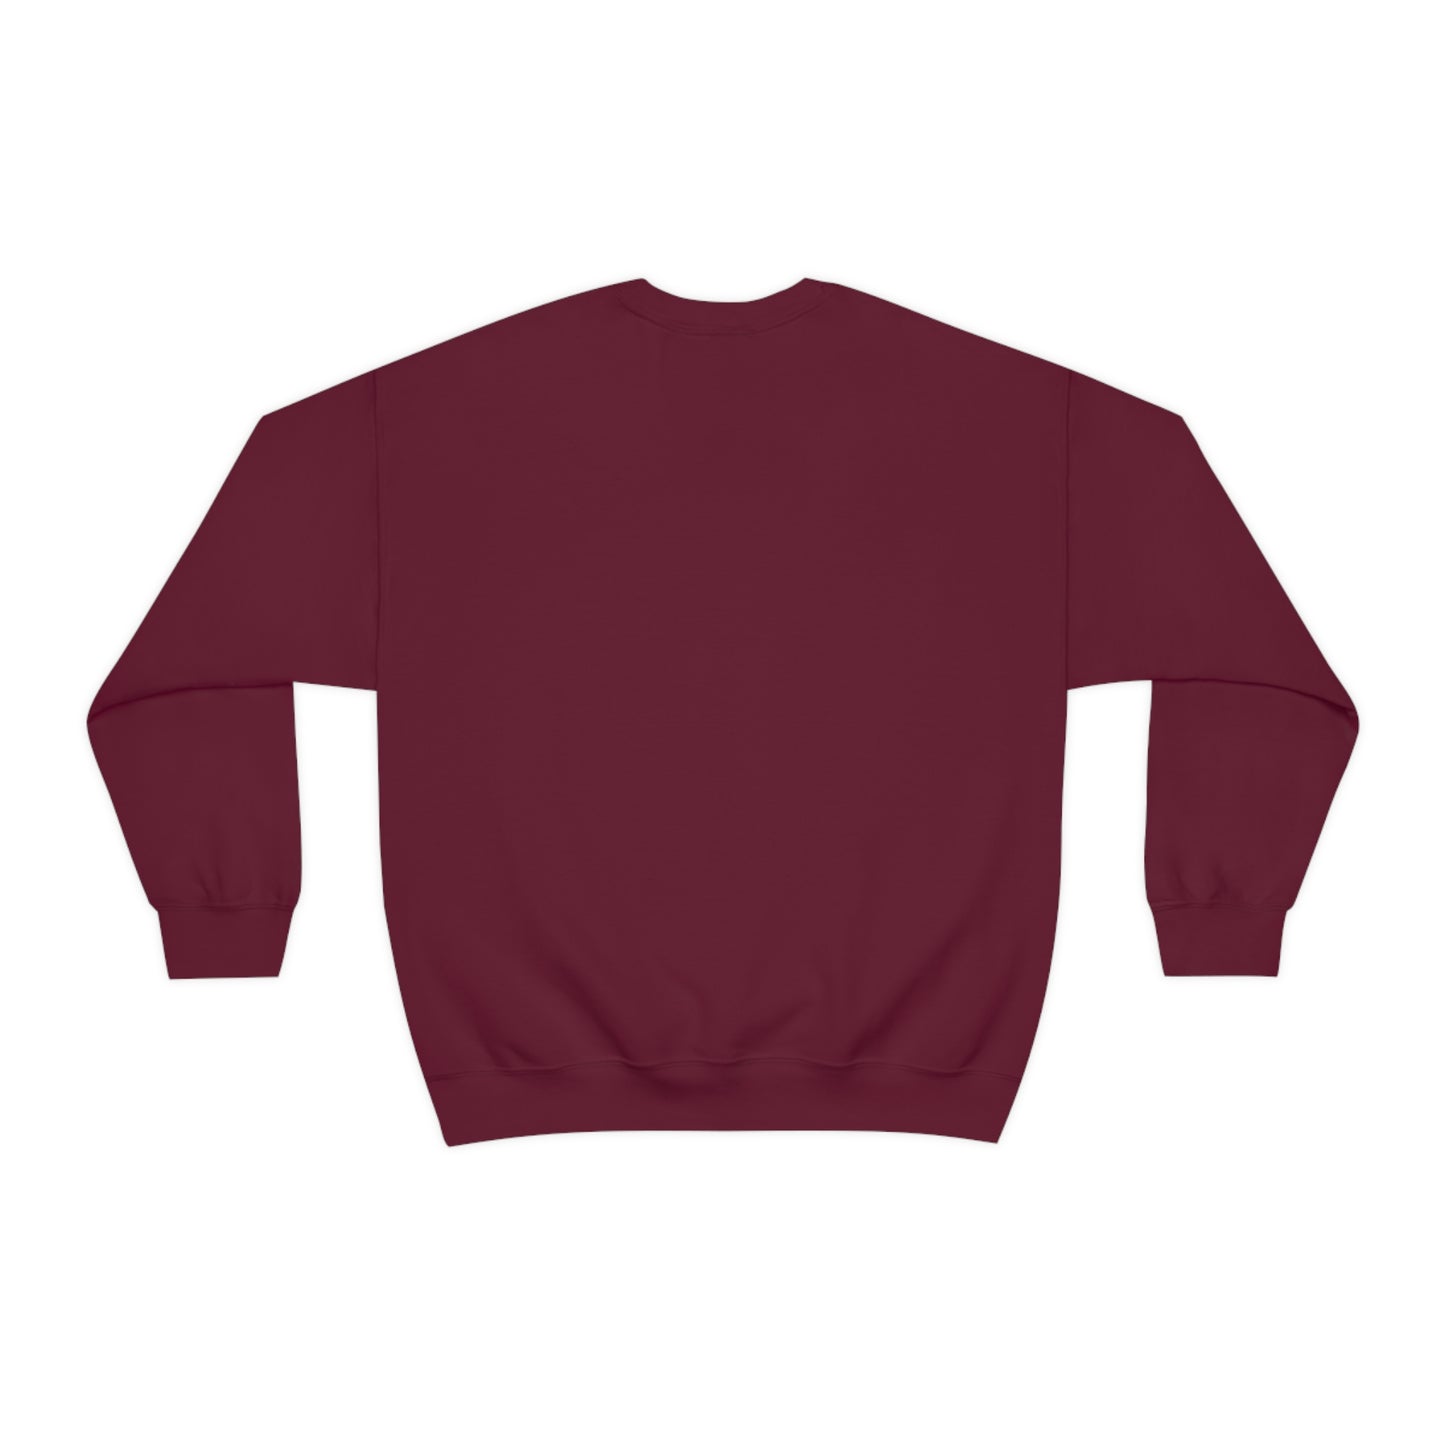 Flat back view of the Maroon shirt